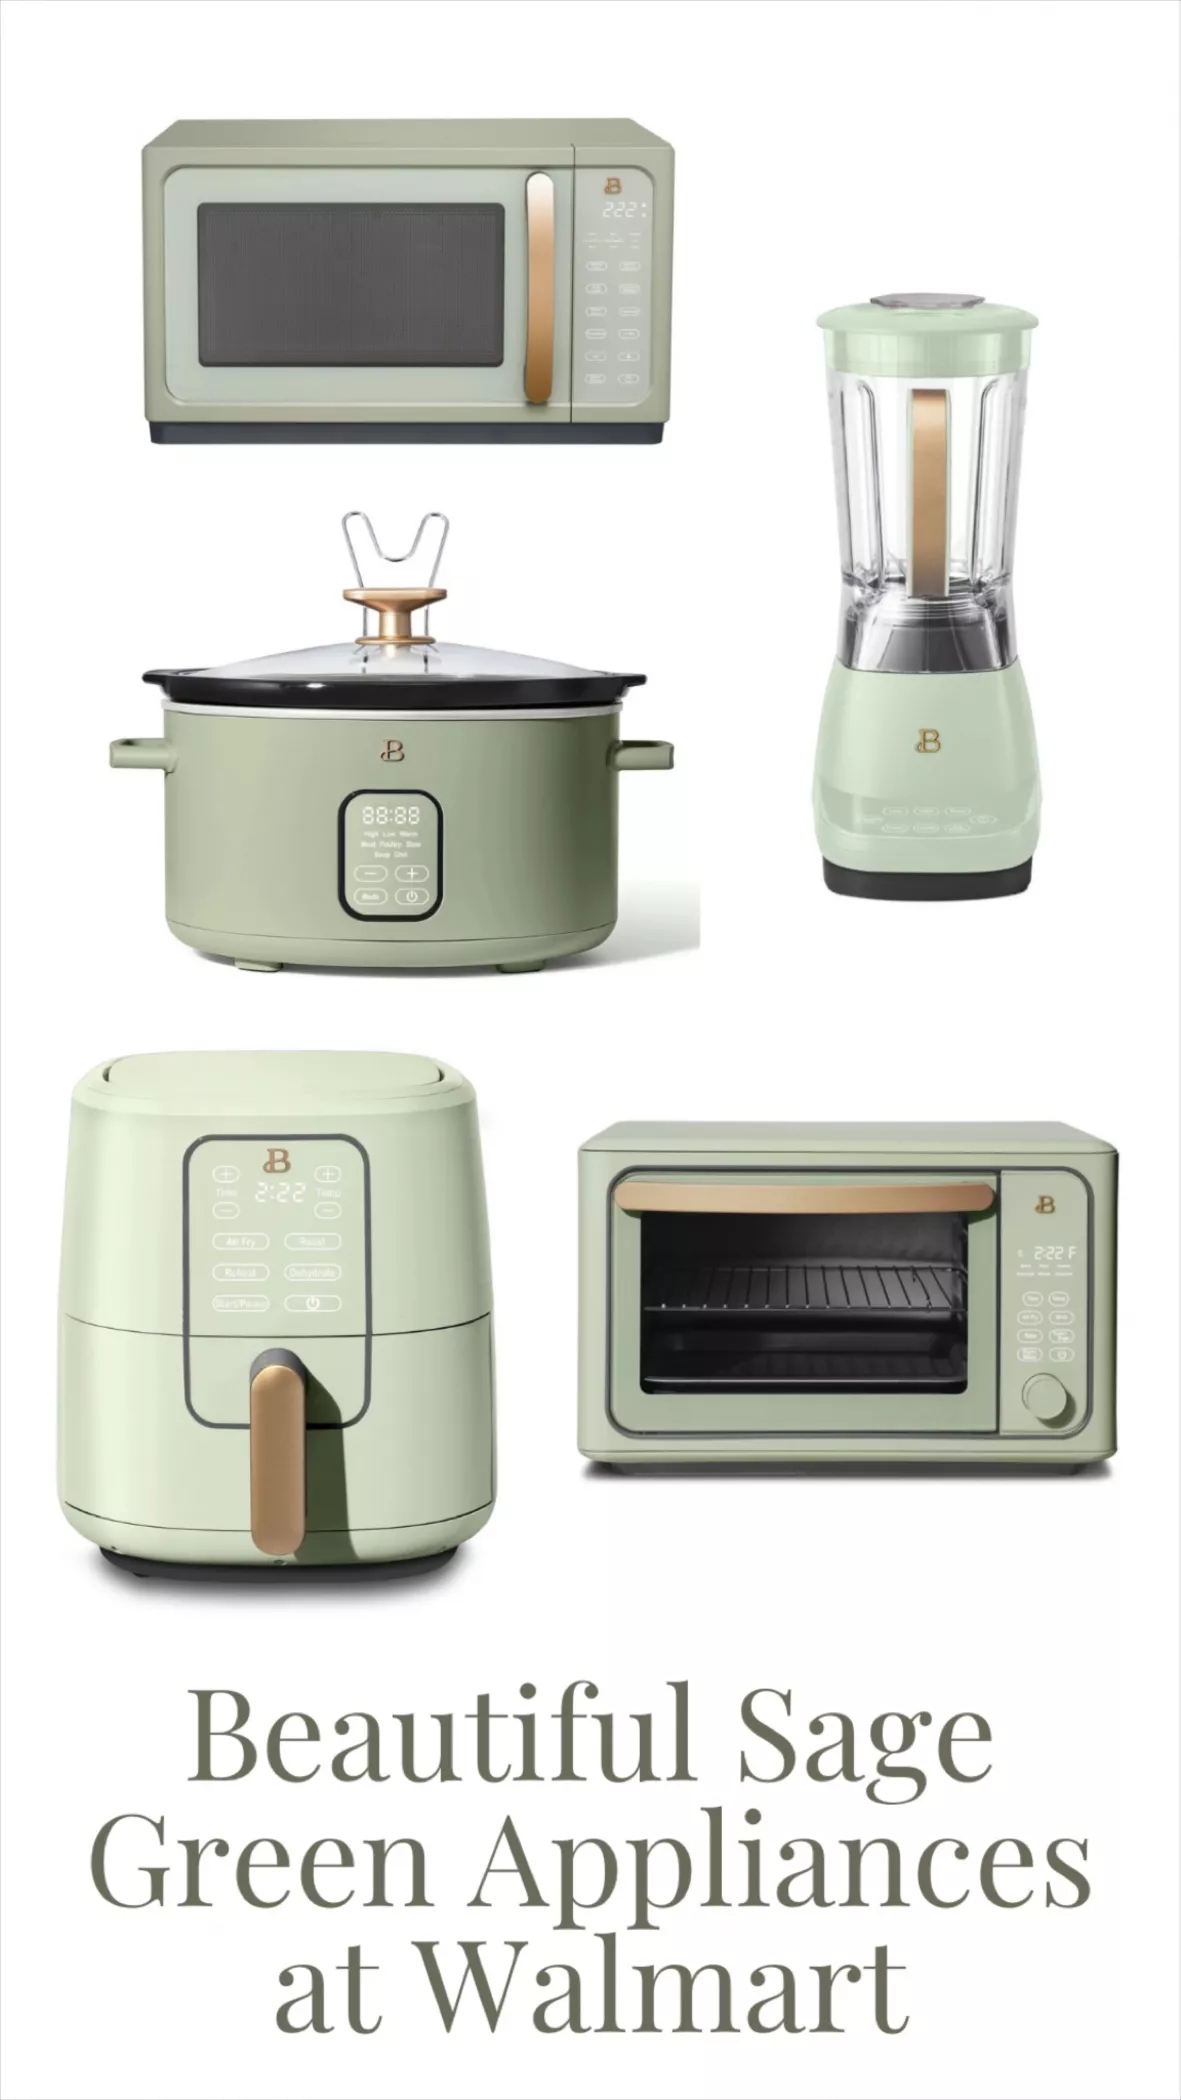 Beautiful By Drew Barrymore Kitchenware and Appliances - Walmart Finds